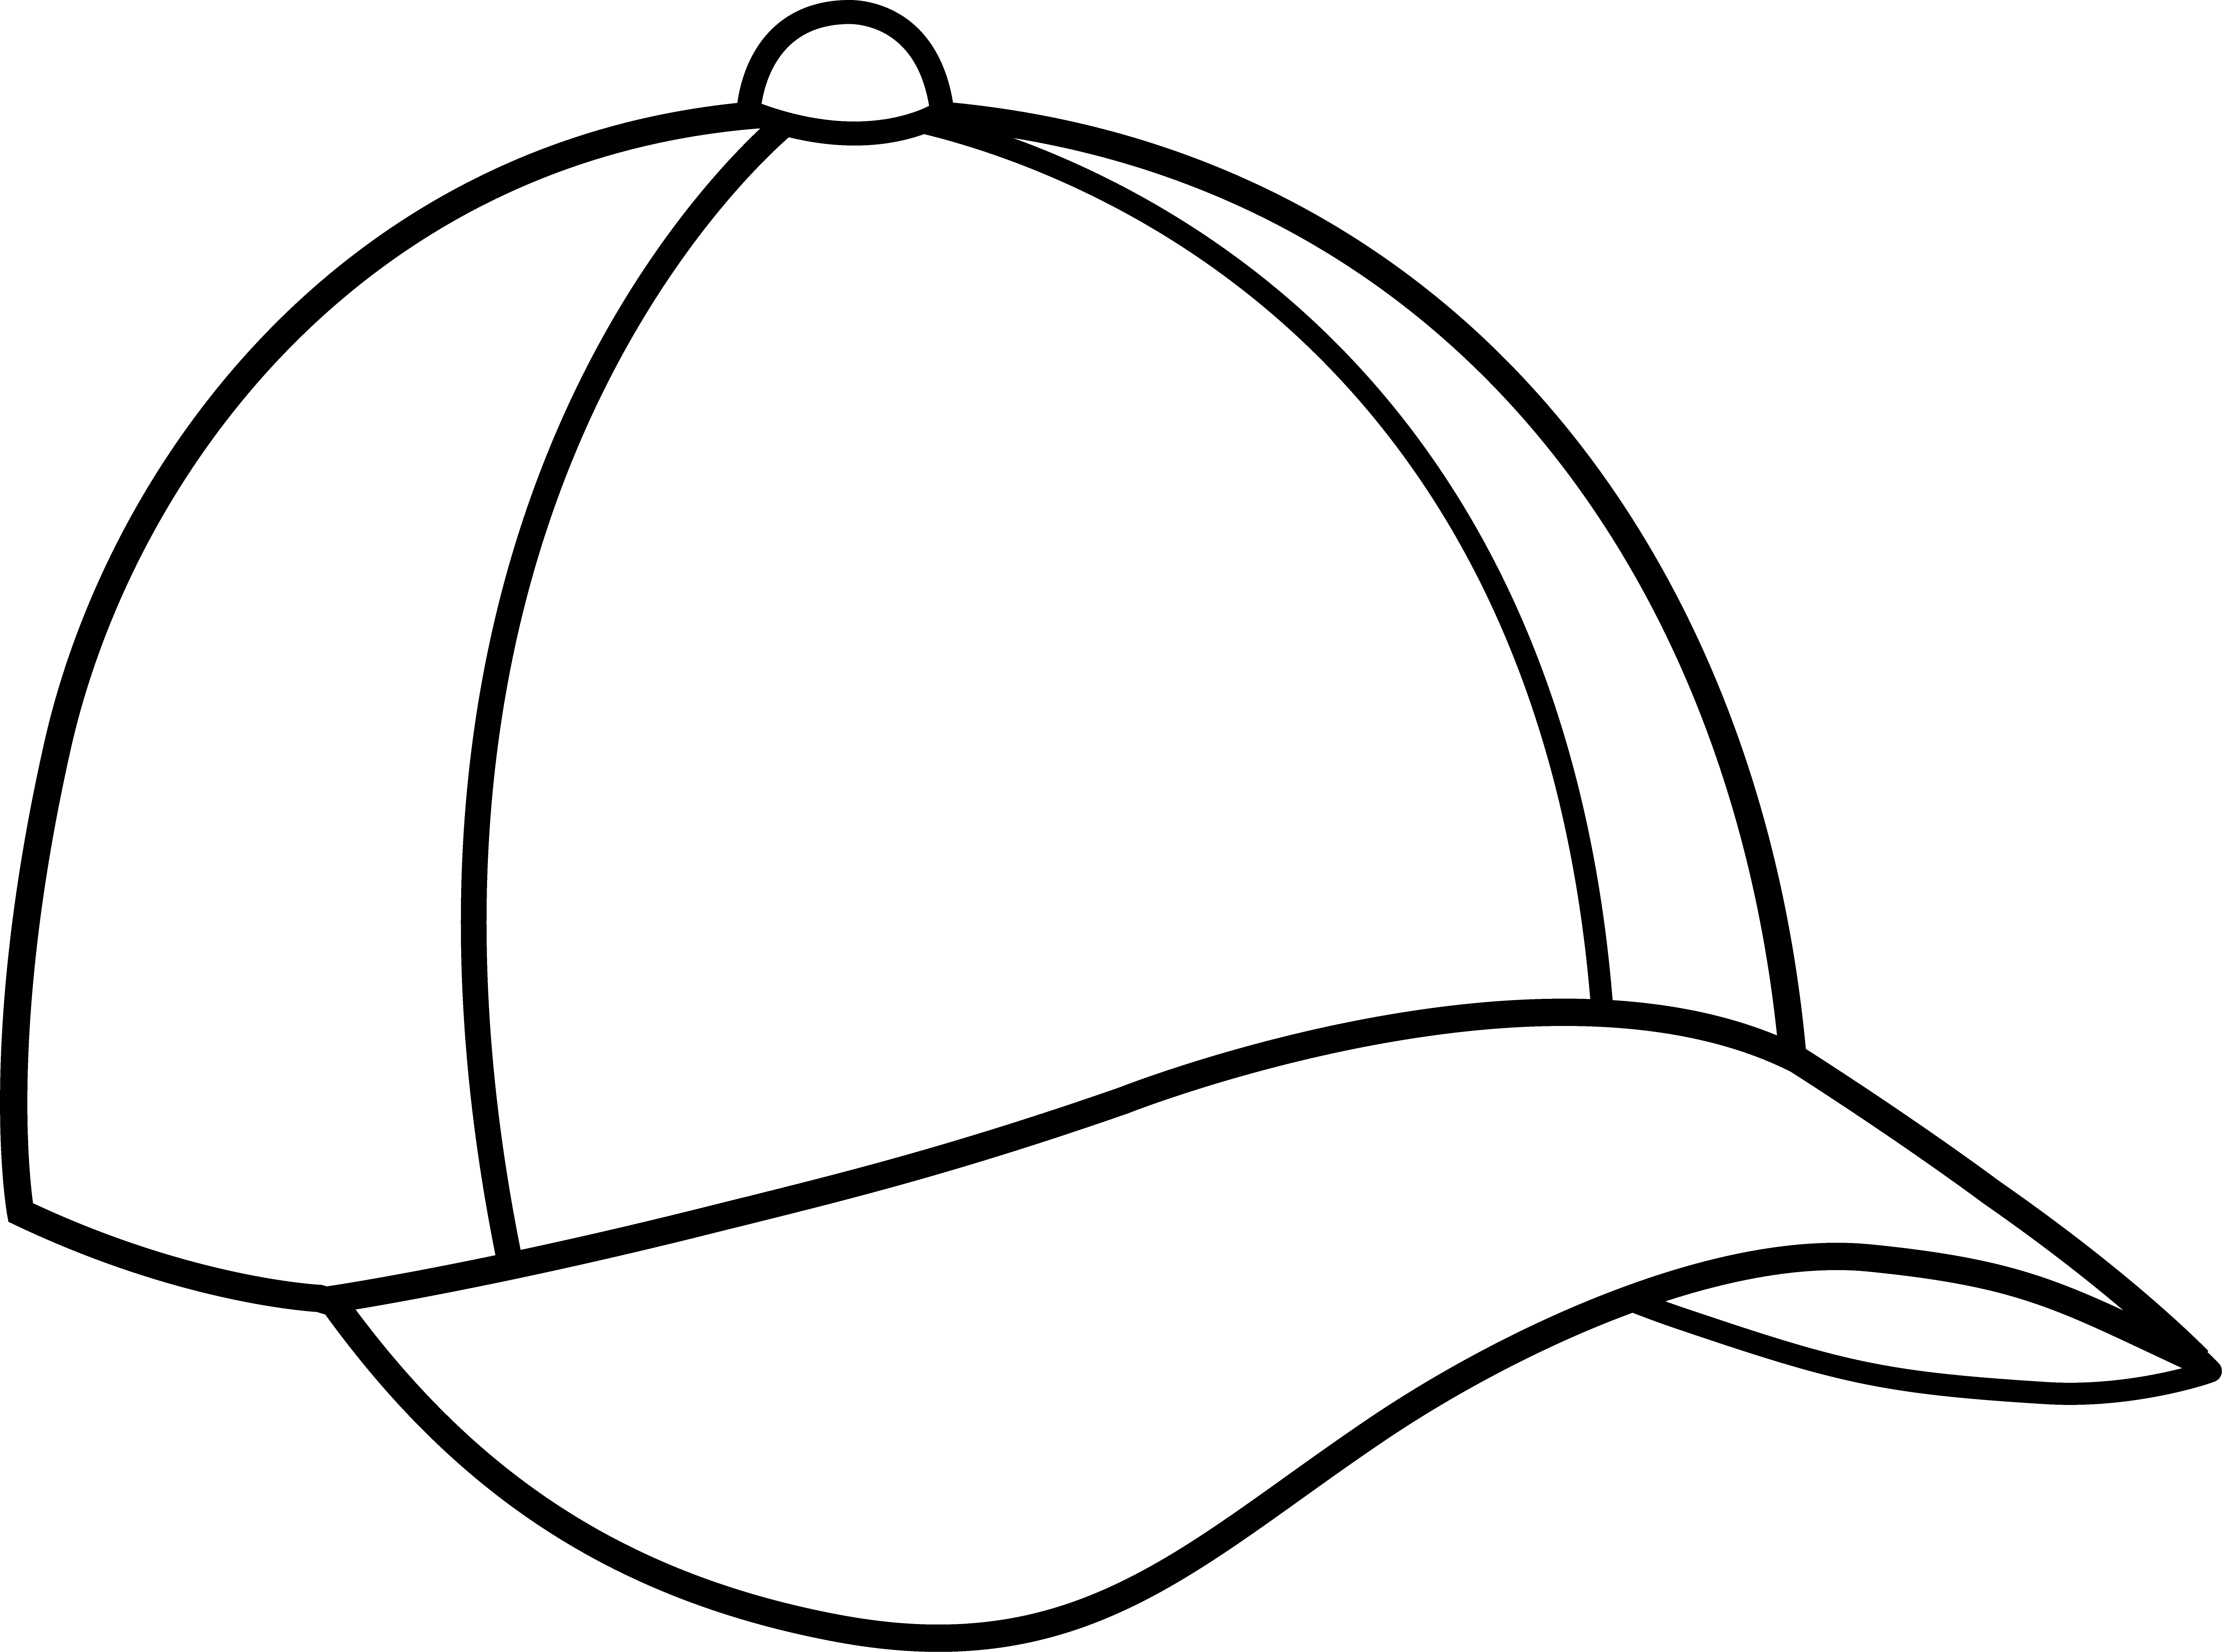 Cap black and white. Diploma clipart draw